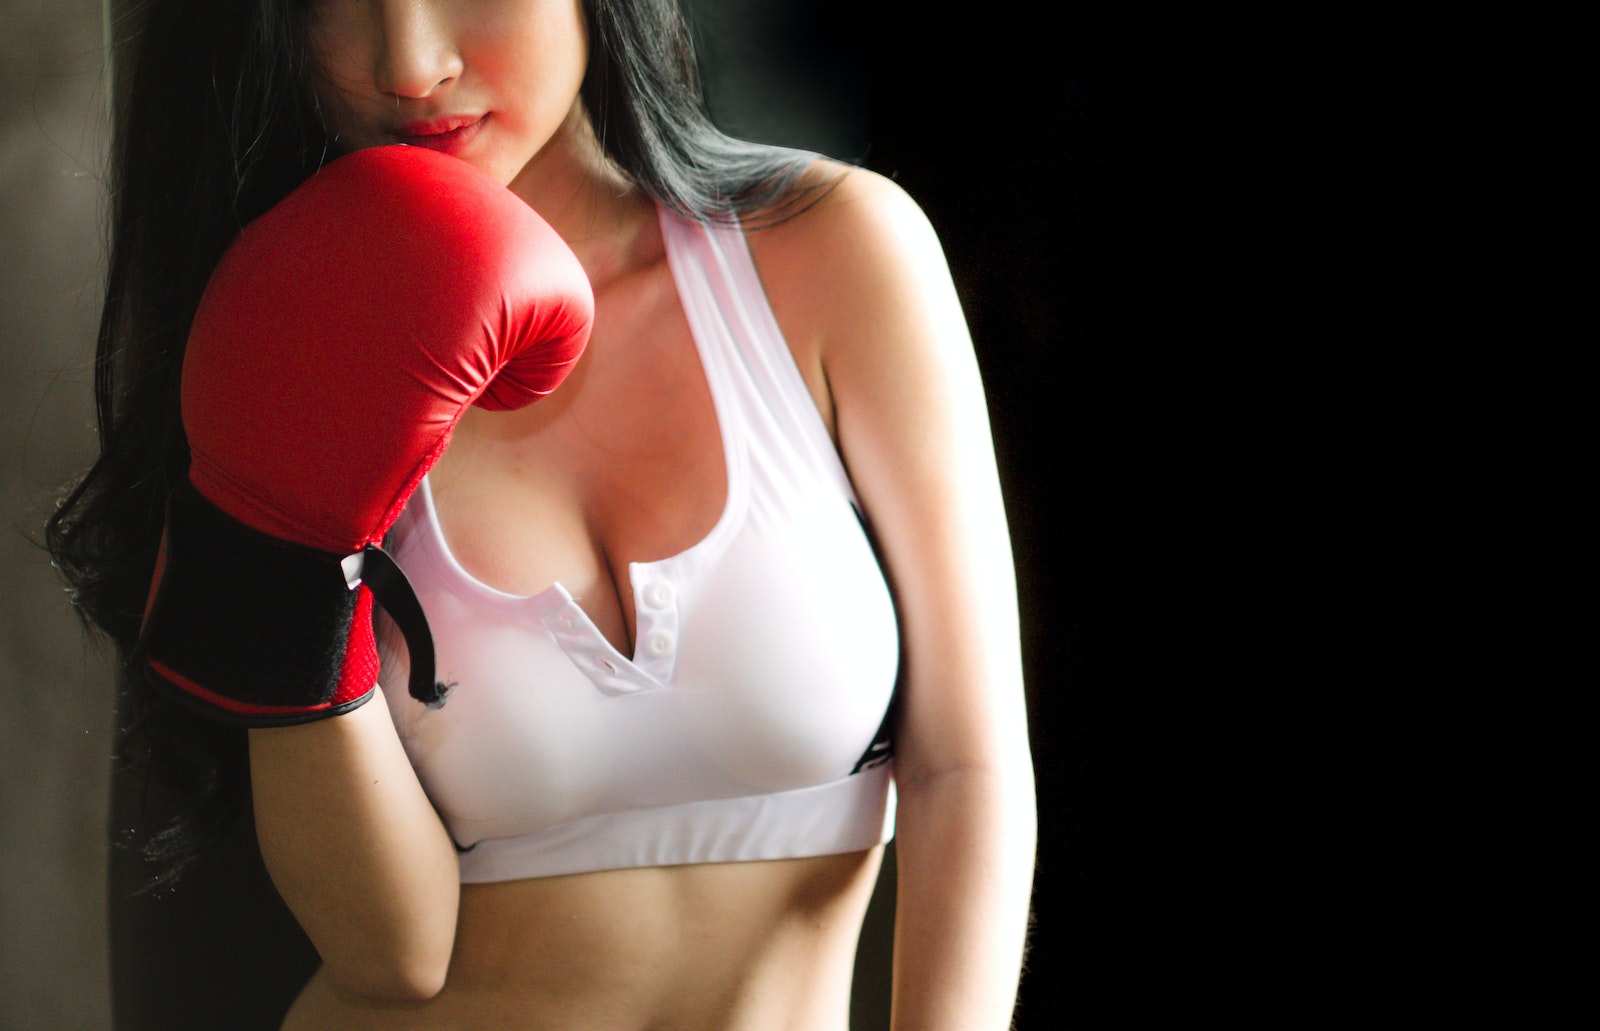 Woman in White Sports Bra and Red Boxing Glove